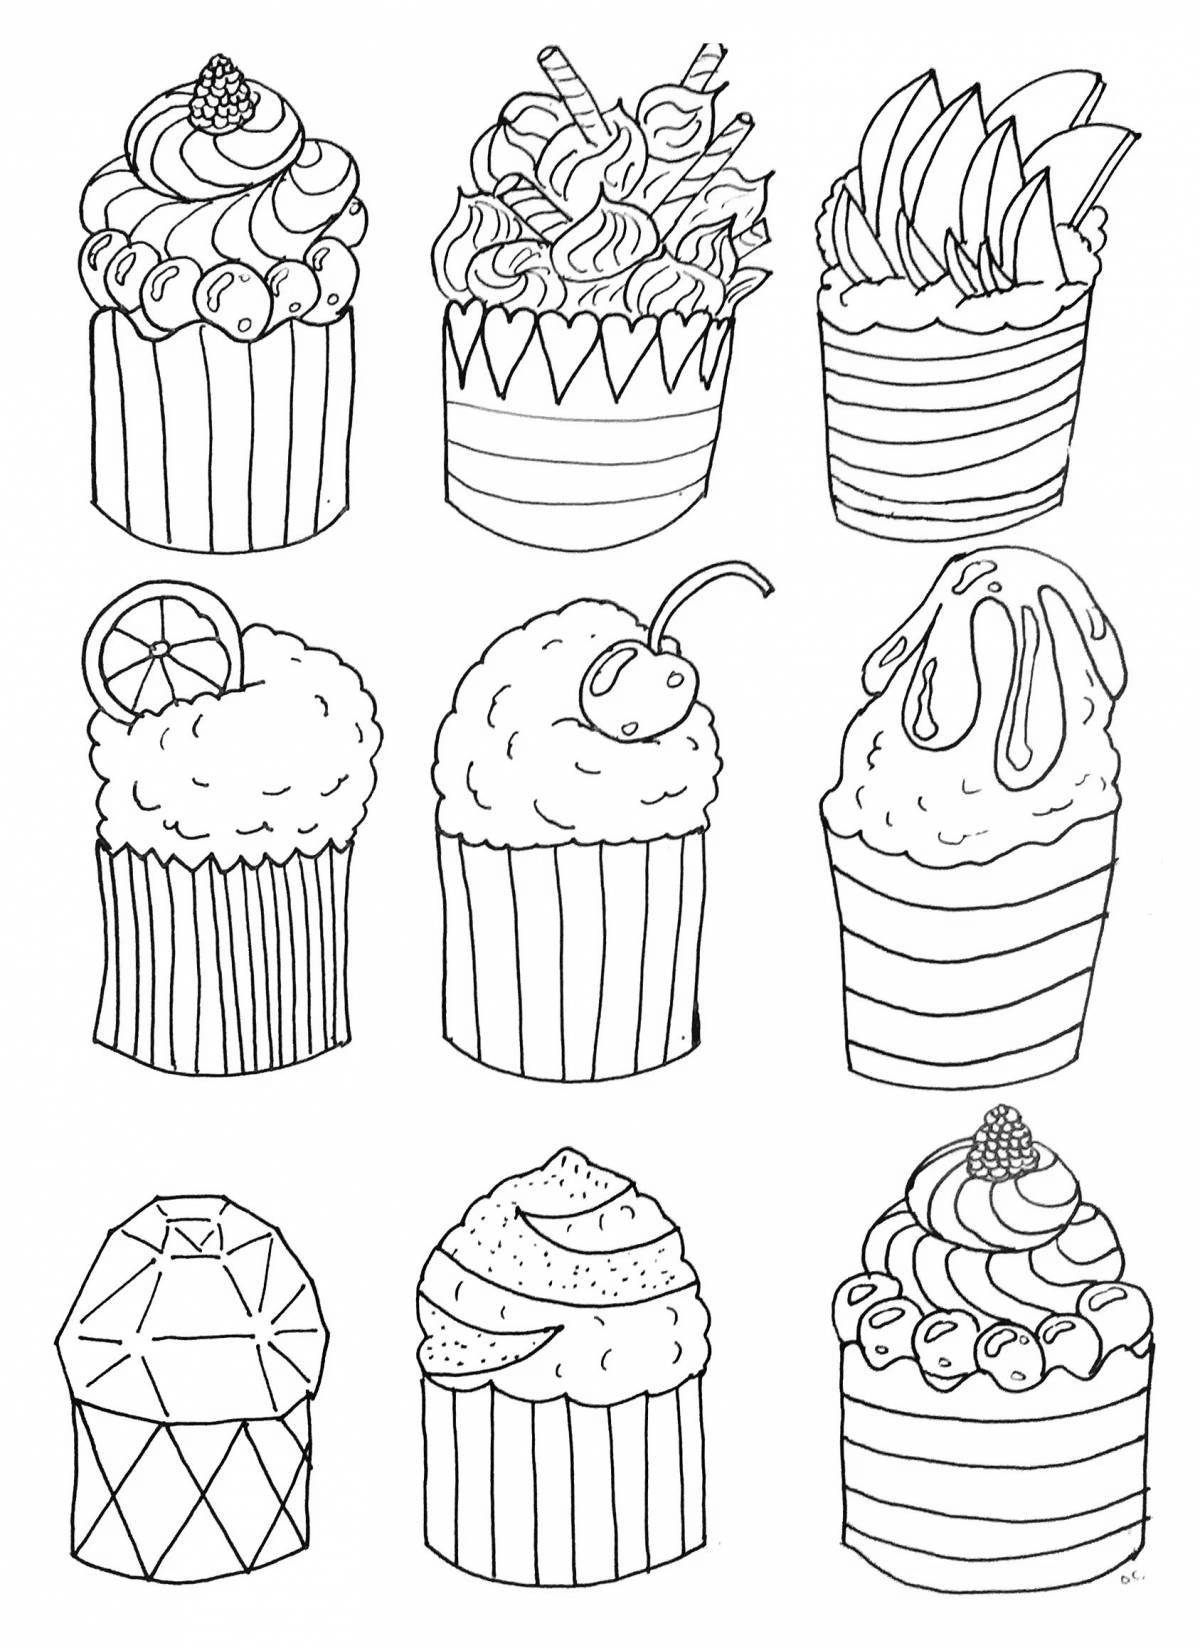 Playful cake coloring page for kids